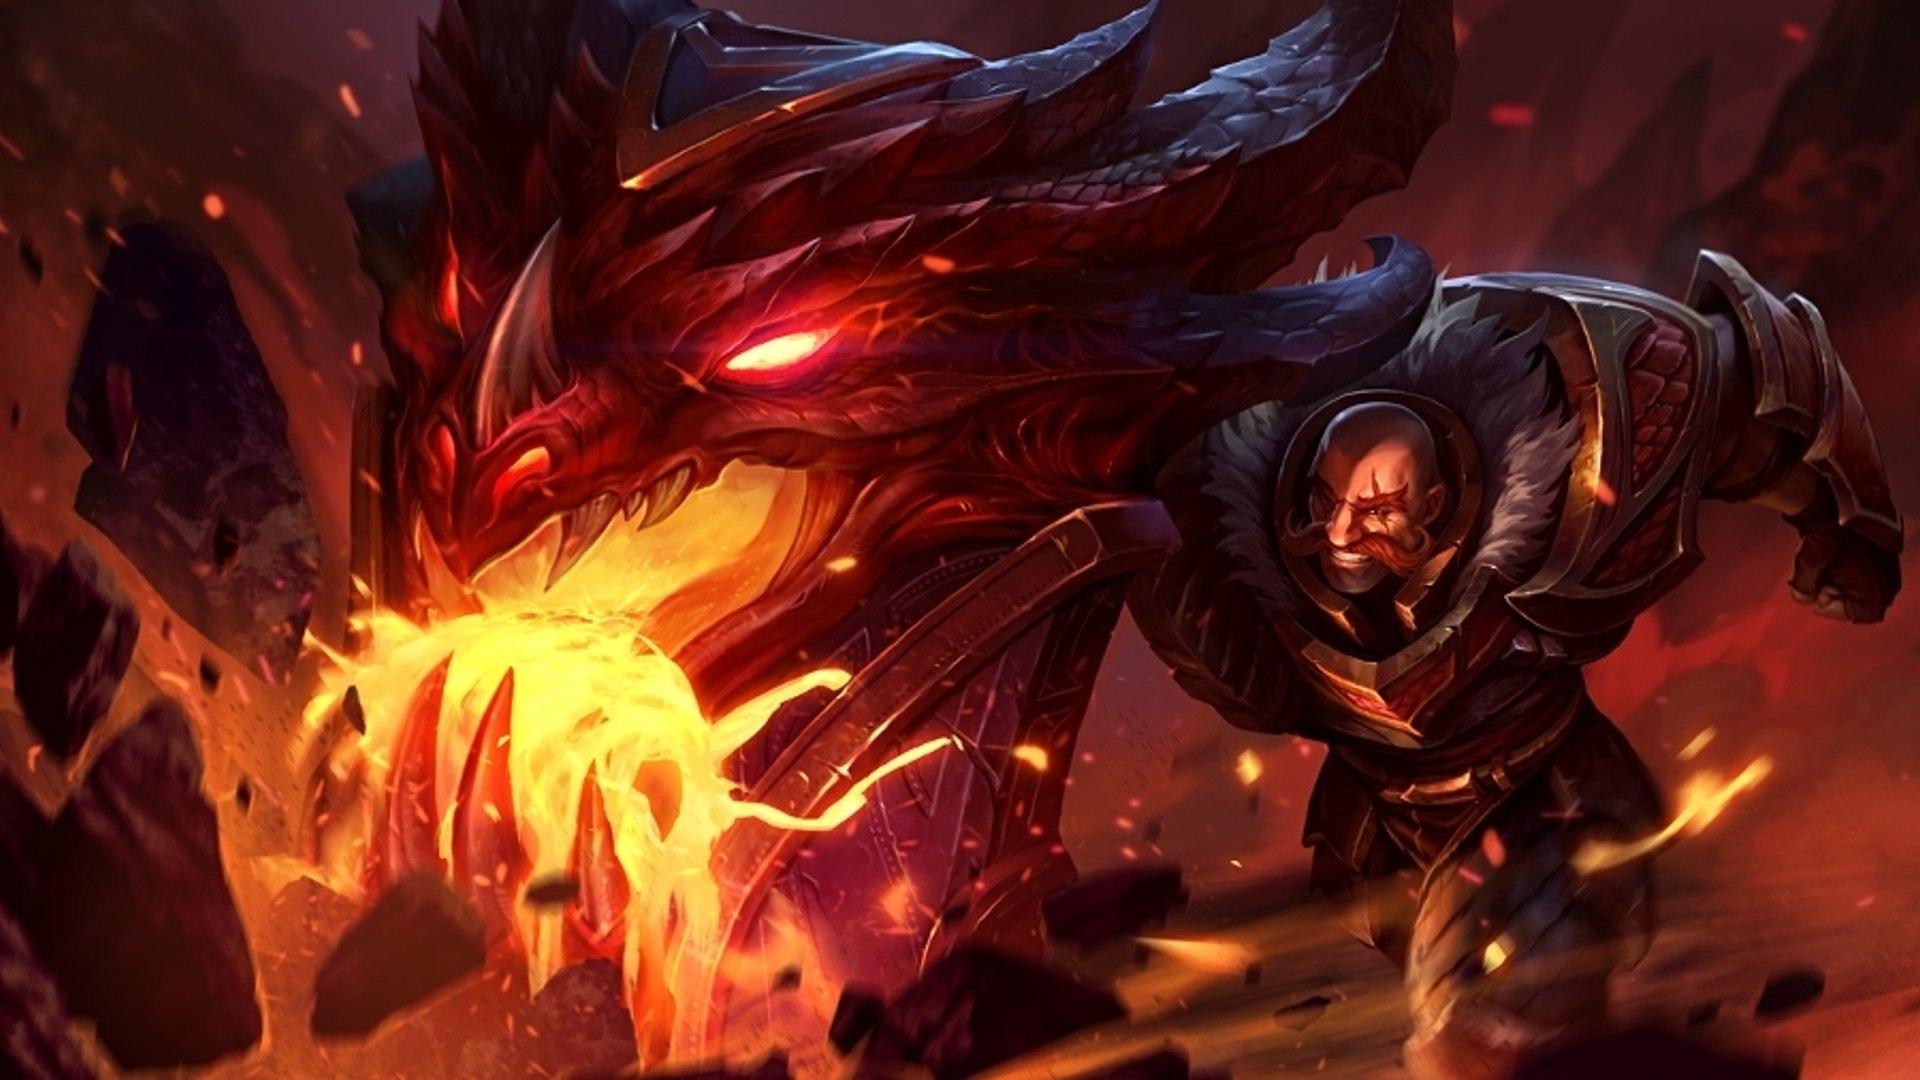 Dragonslayer Braum in League of Legends